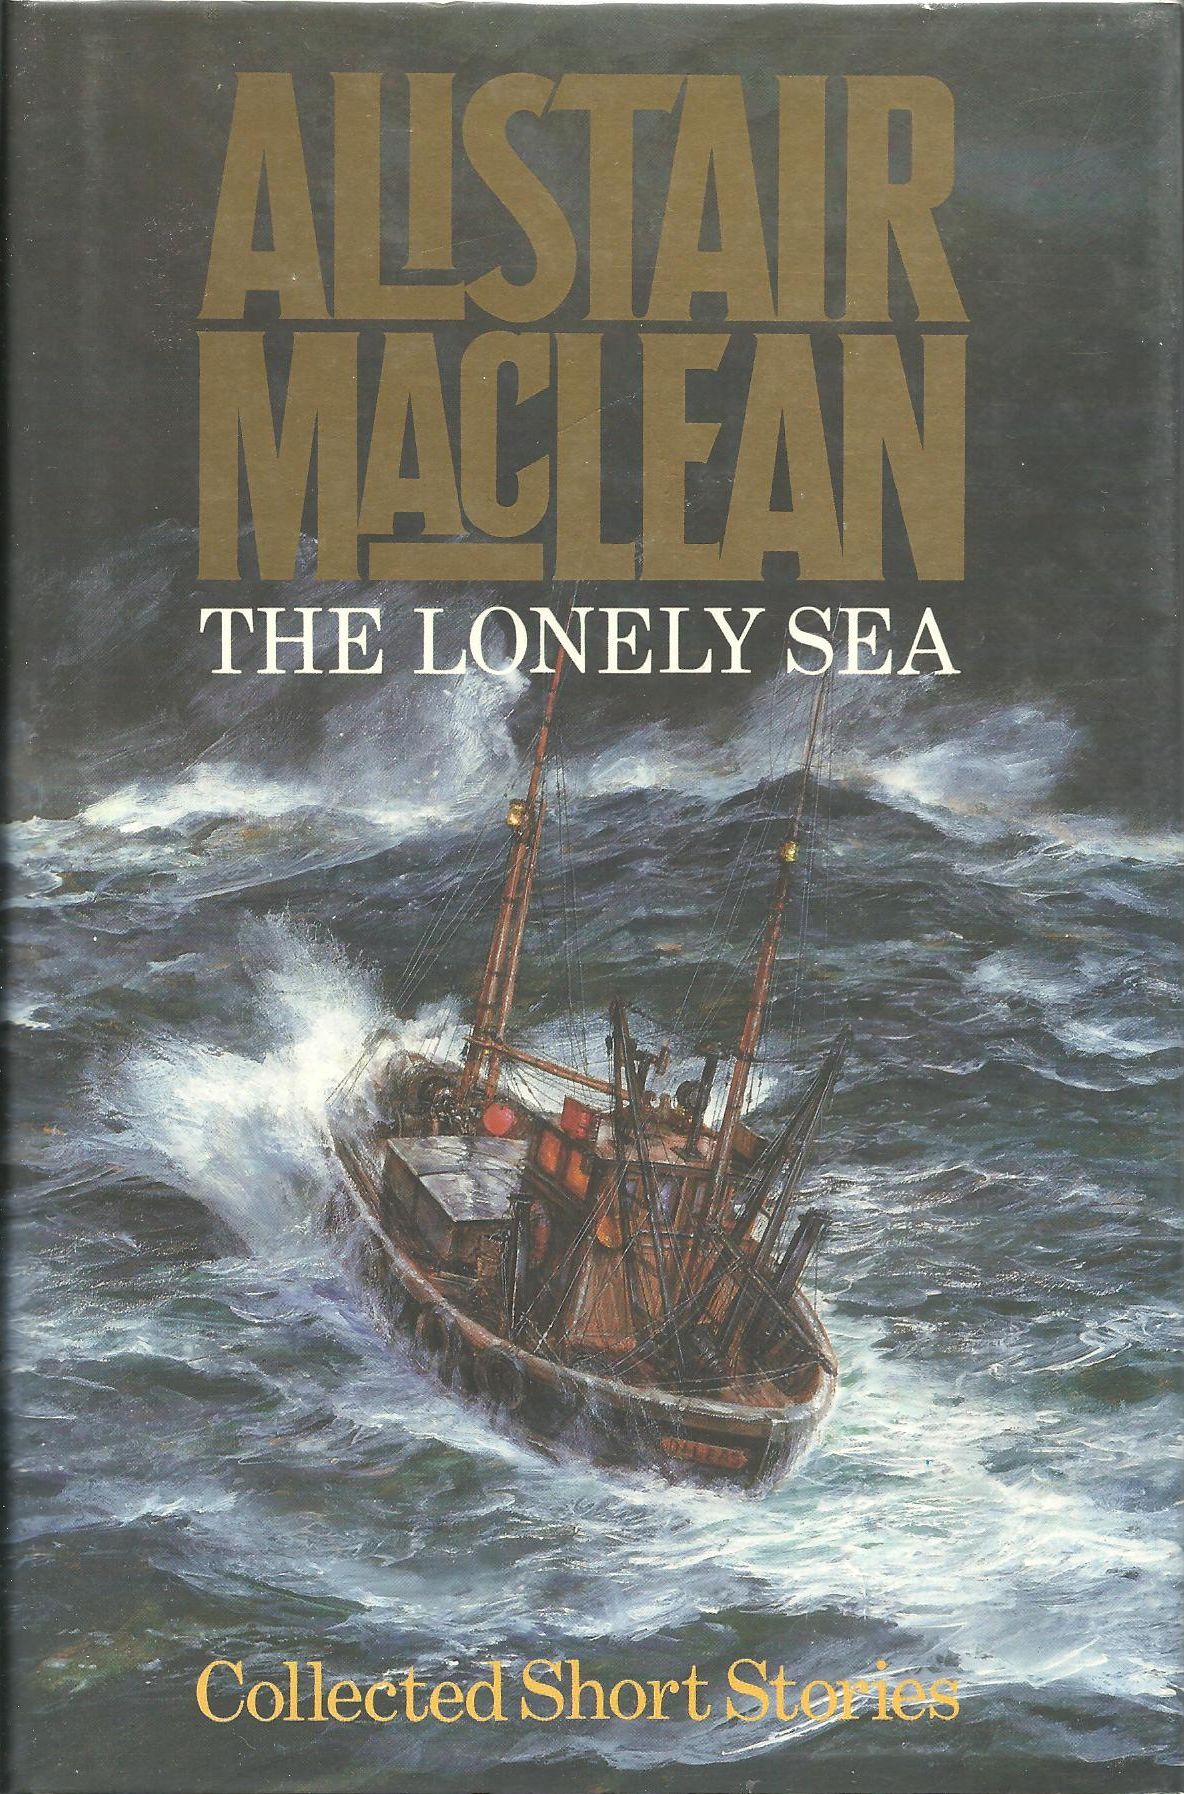 The Lonely Sea - UK first edition